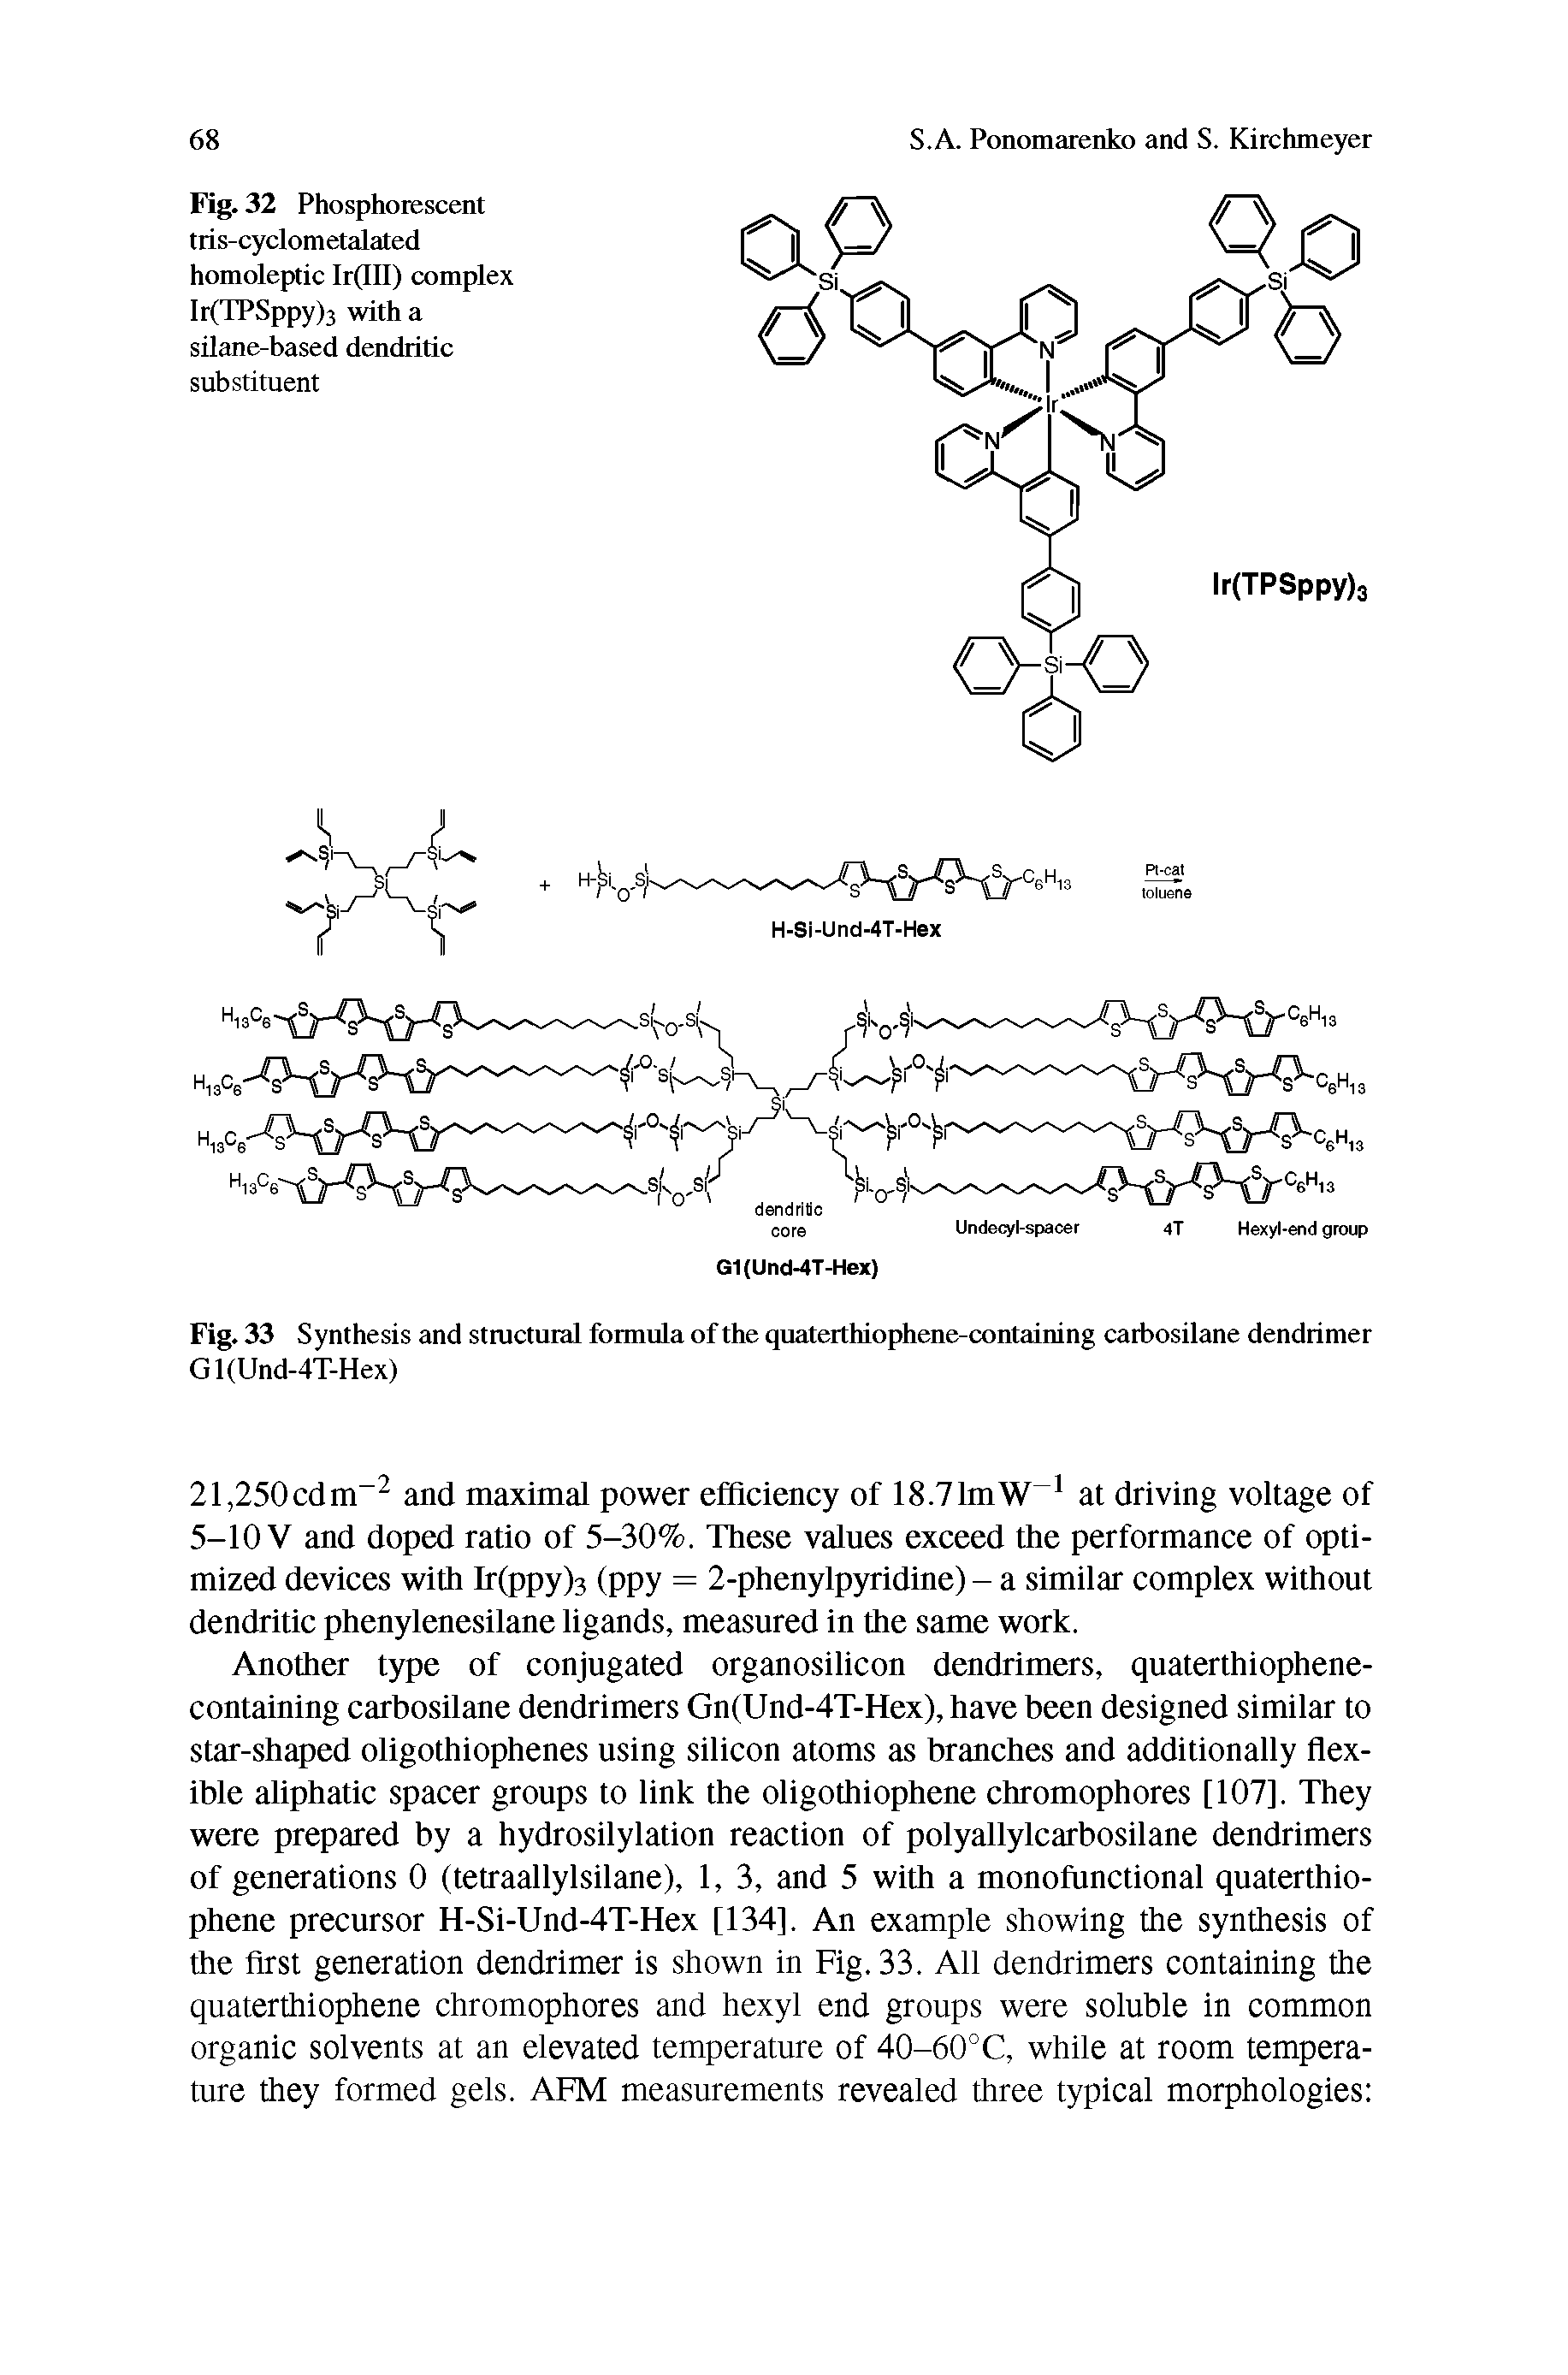 Fig. 33 Synthesis and structural formula of the quaterthiophene-containing carbosilane dendrimer Gl(Und-4T-Hex)...